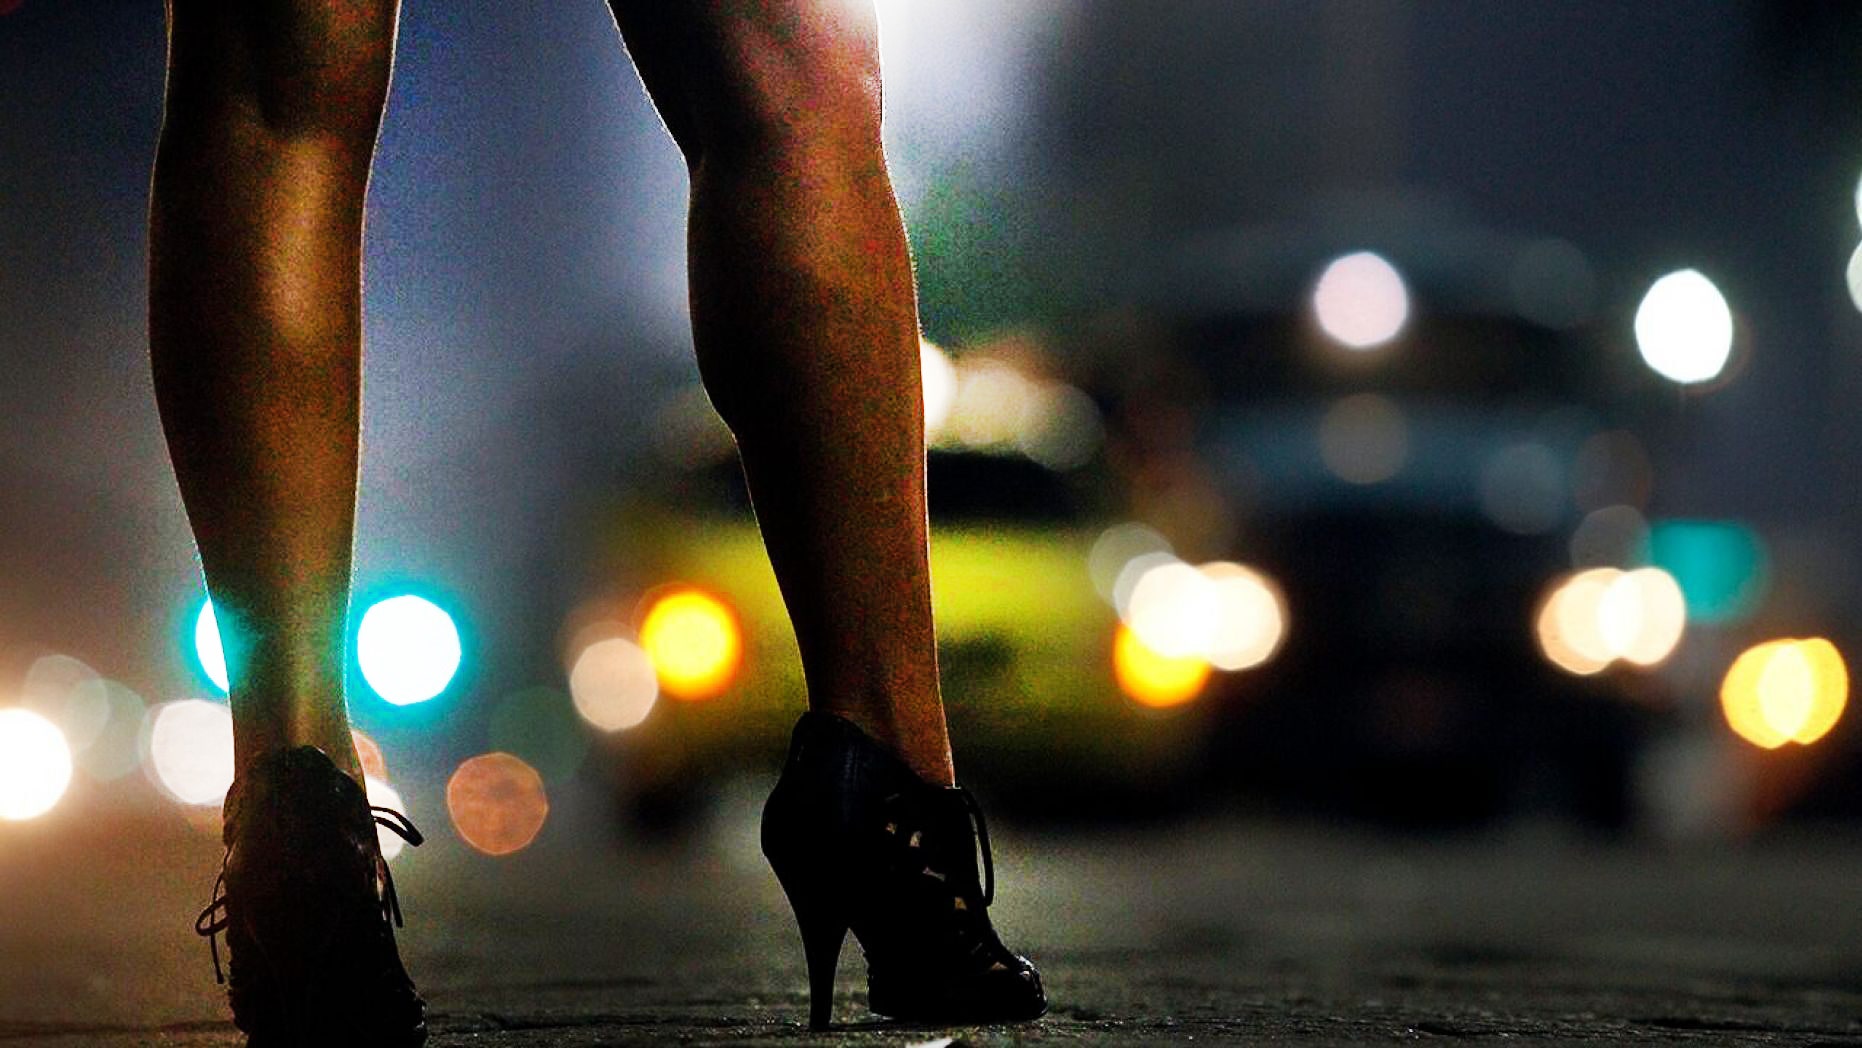 NYC sex workers rampant in open-air prostitution market amid lax enforcement